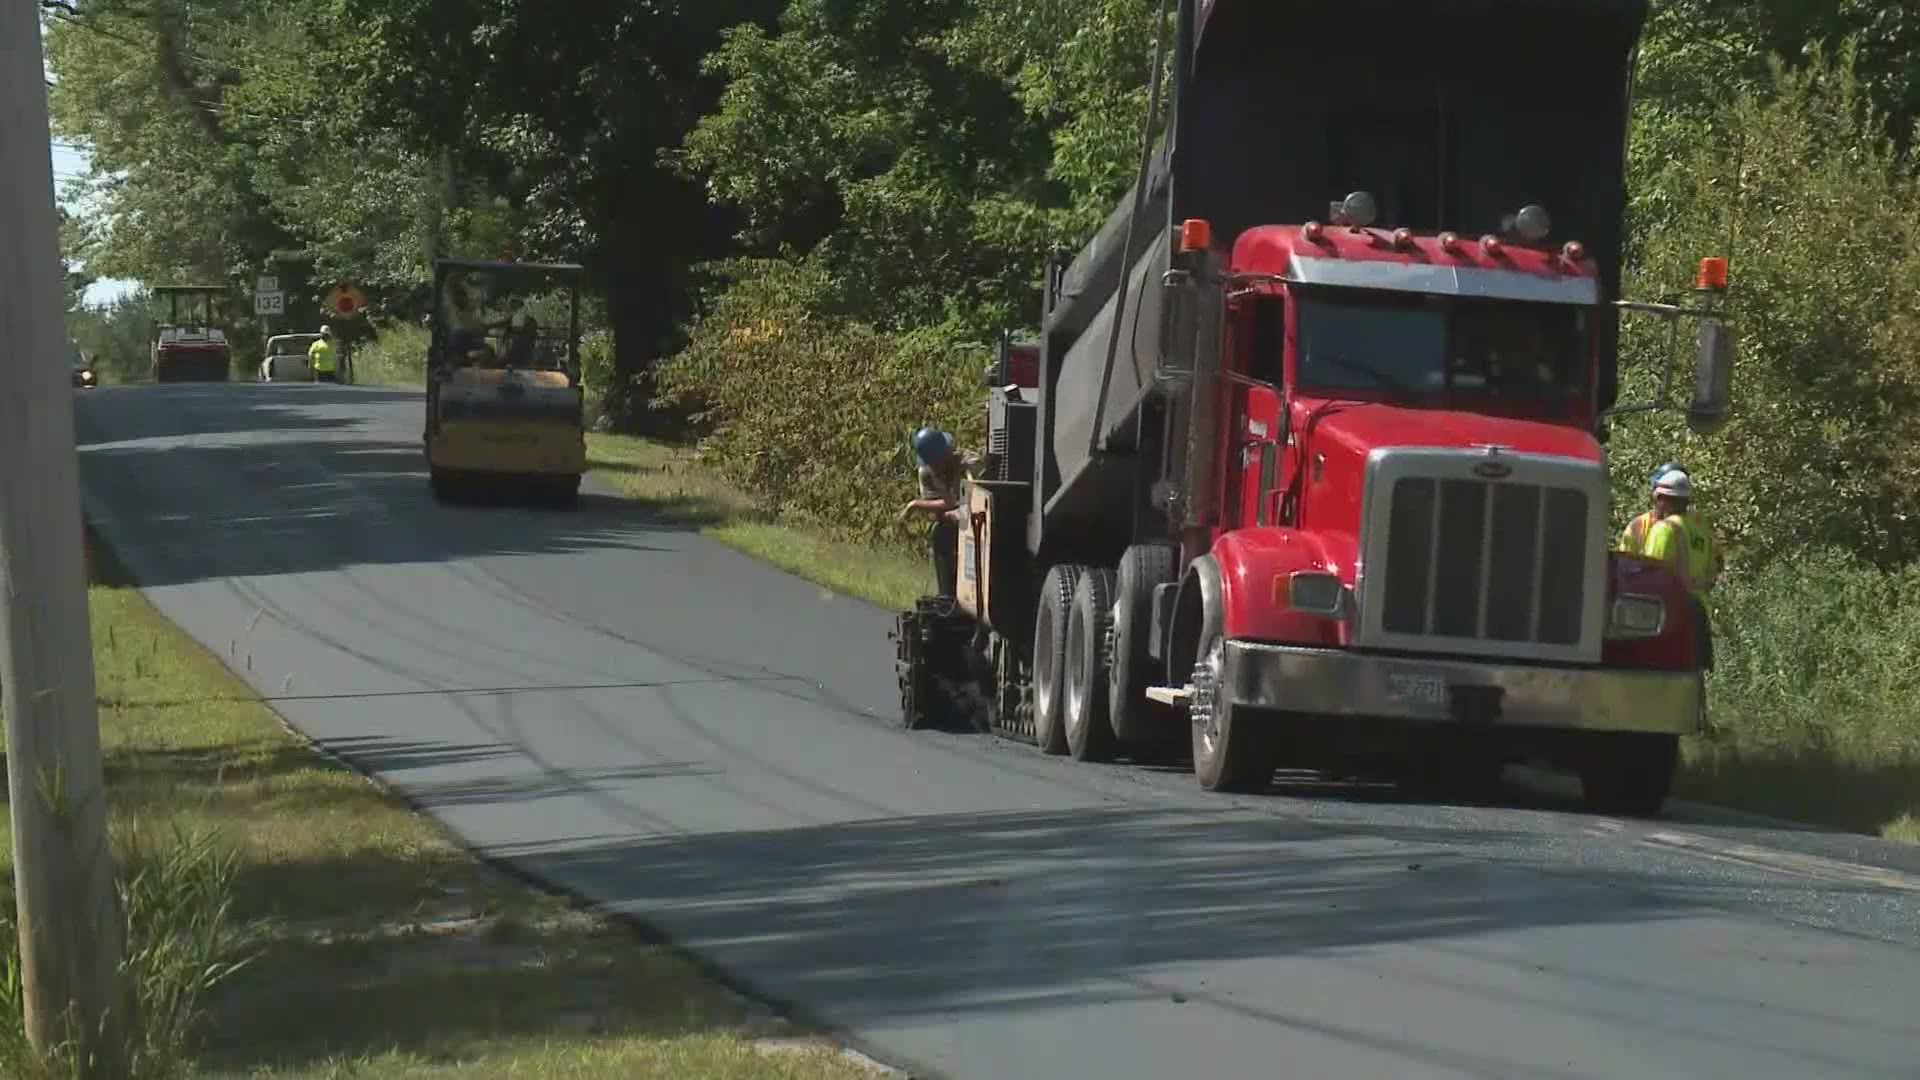 Mainers will vote on putting more money into fixing Maine roads and bridges in July 14 primary